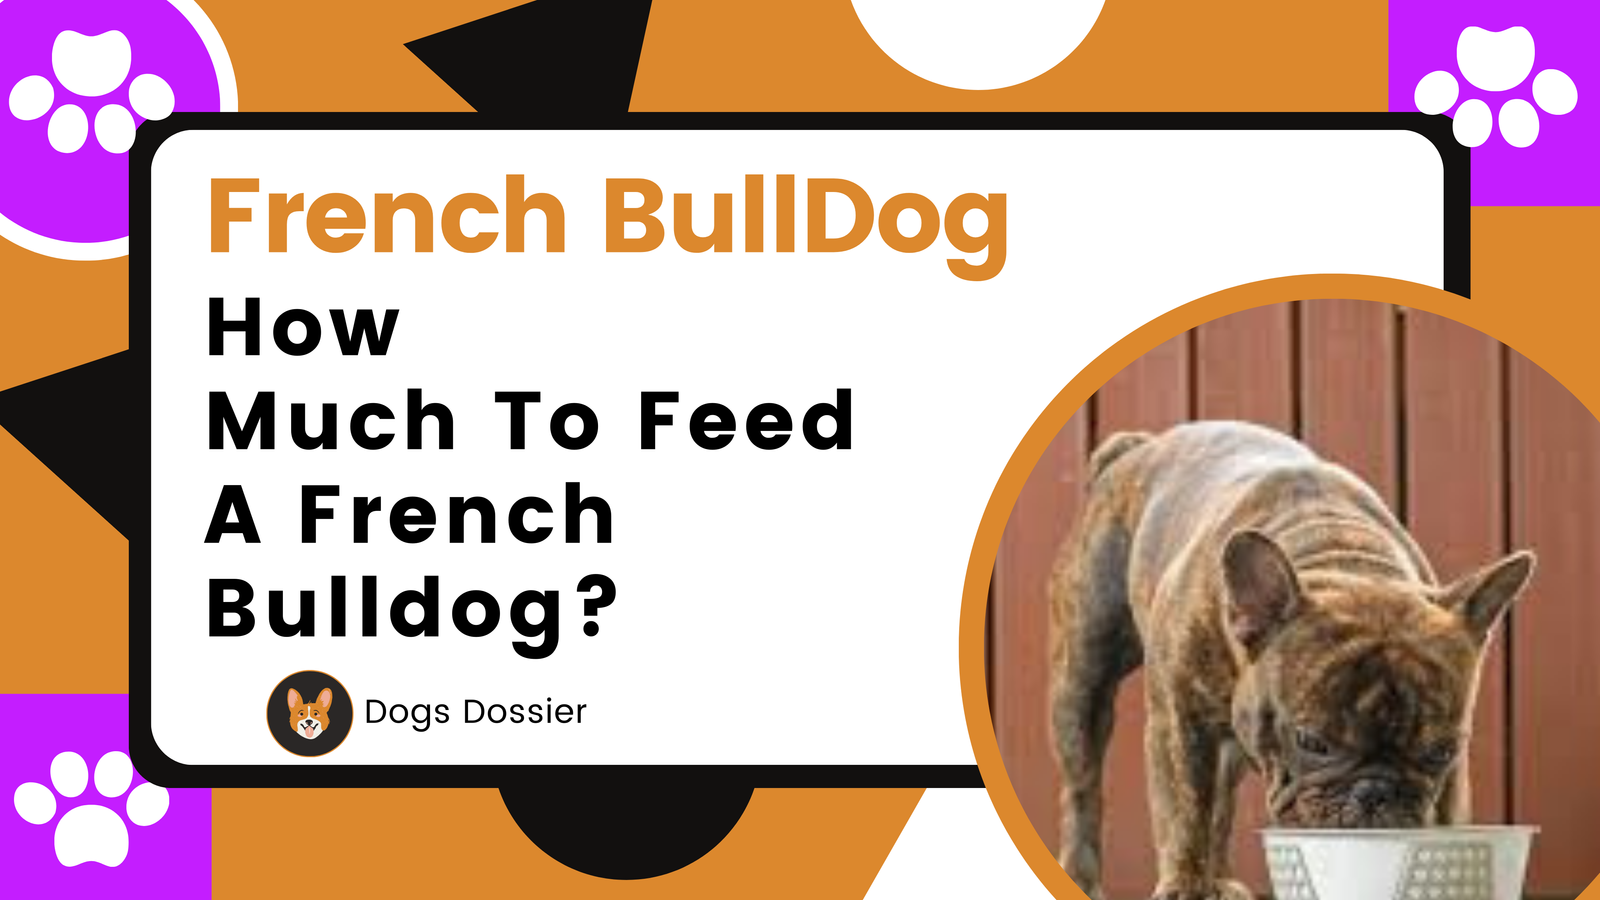 How much to feed a French Bulldog?